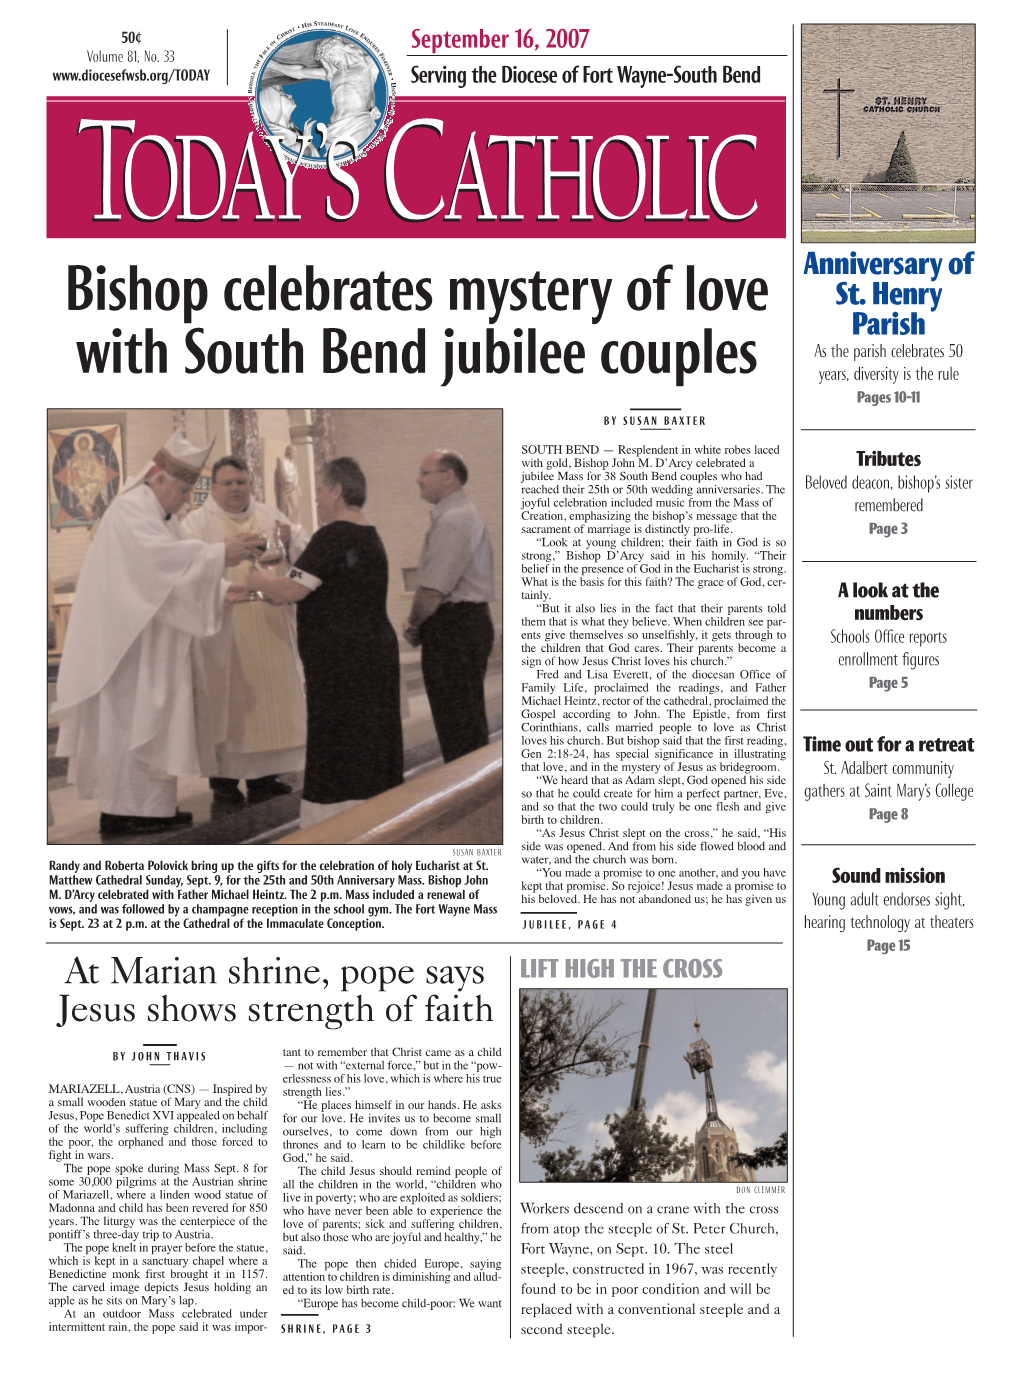 Bishop Celebrates Mystery of Love with South Bend Jubilee Couples